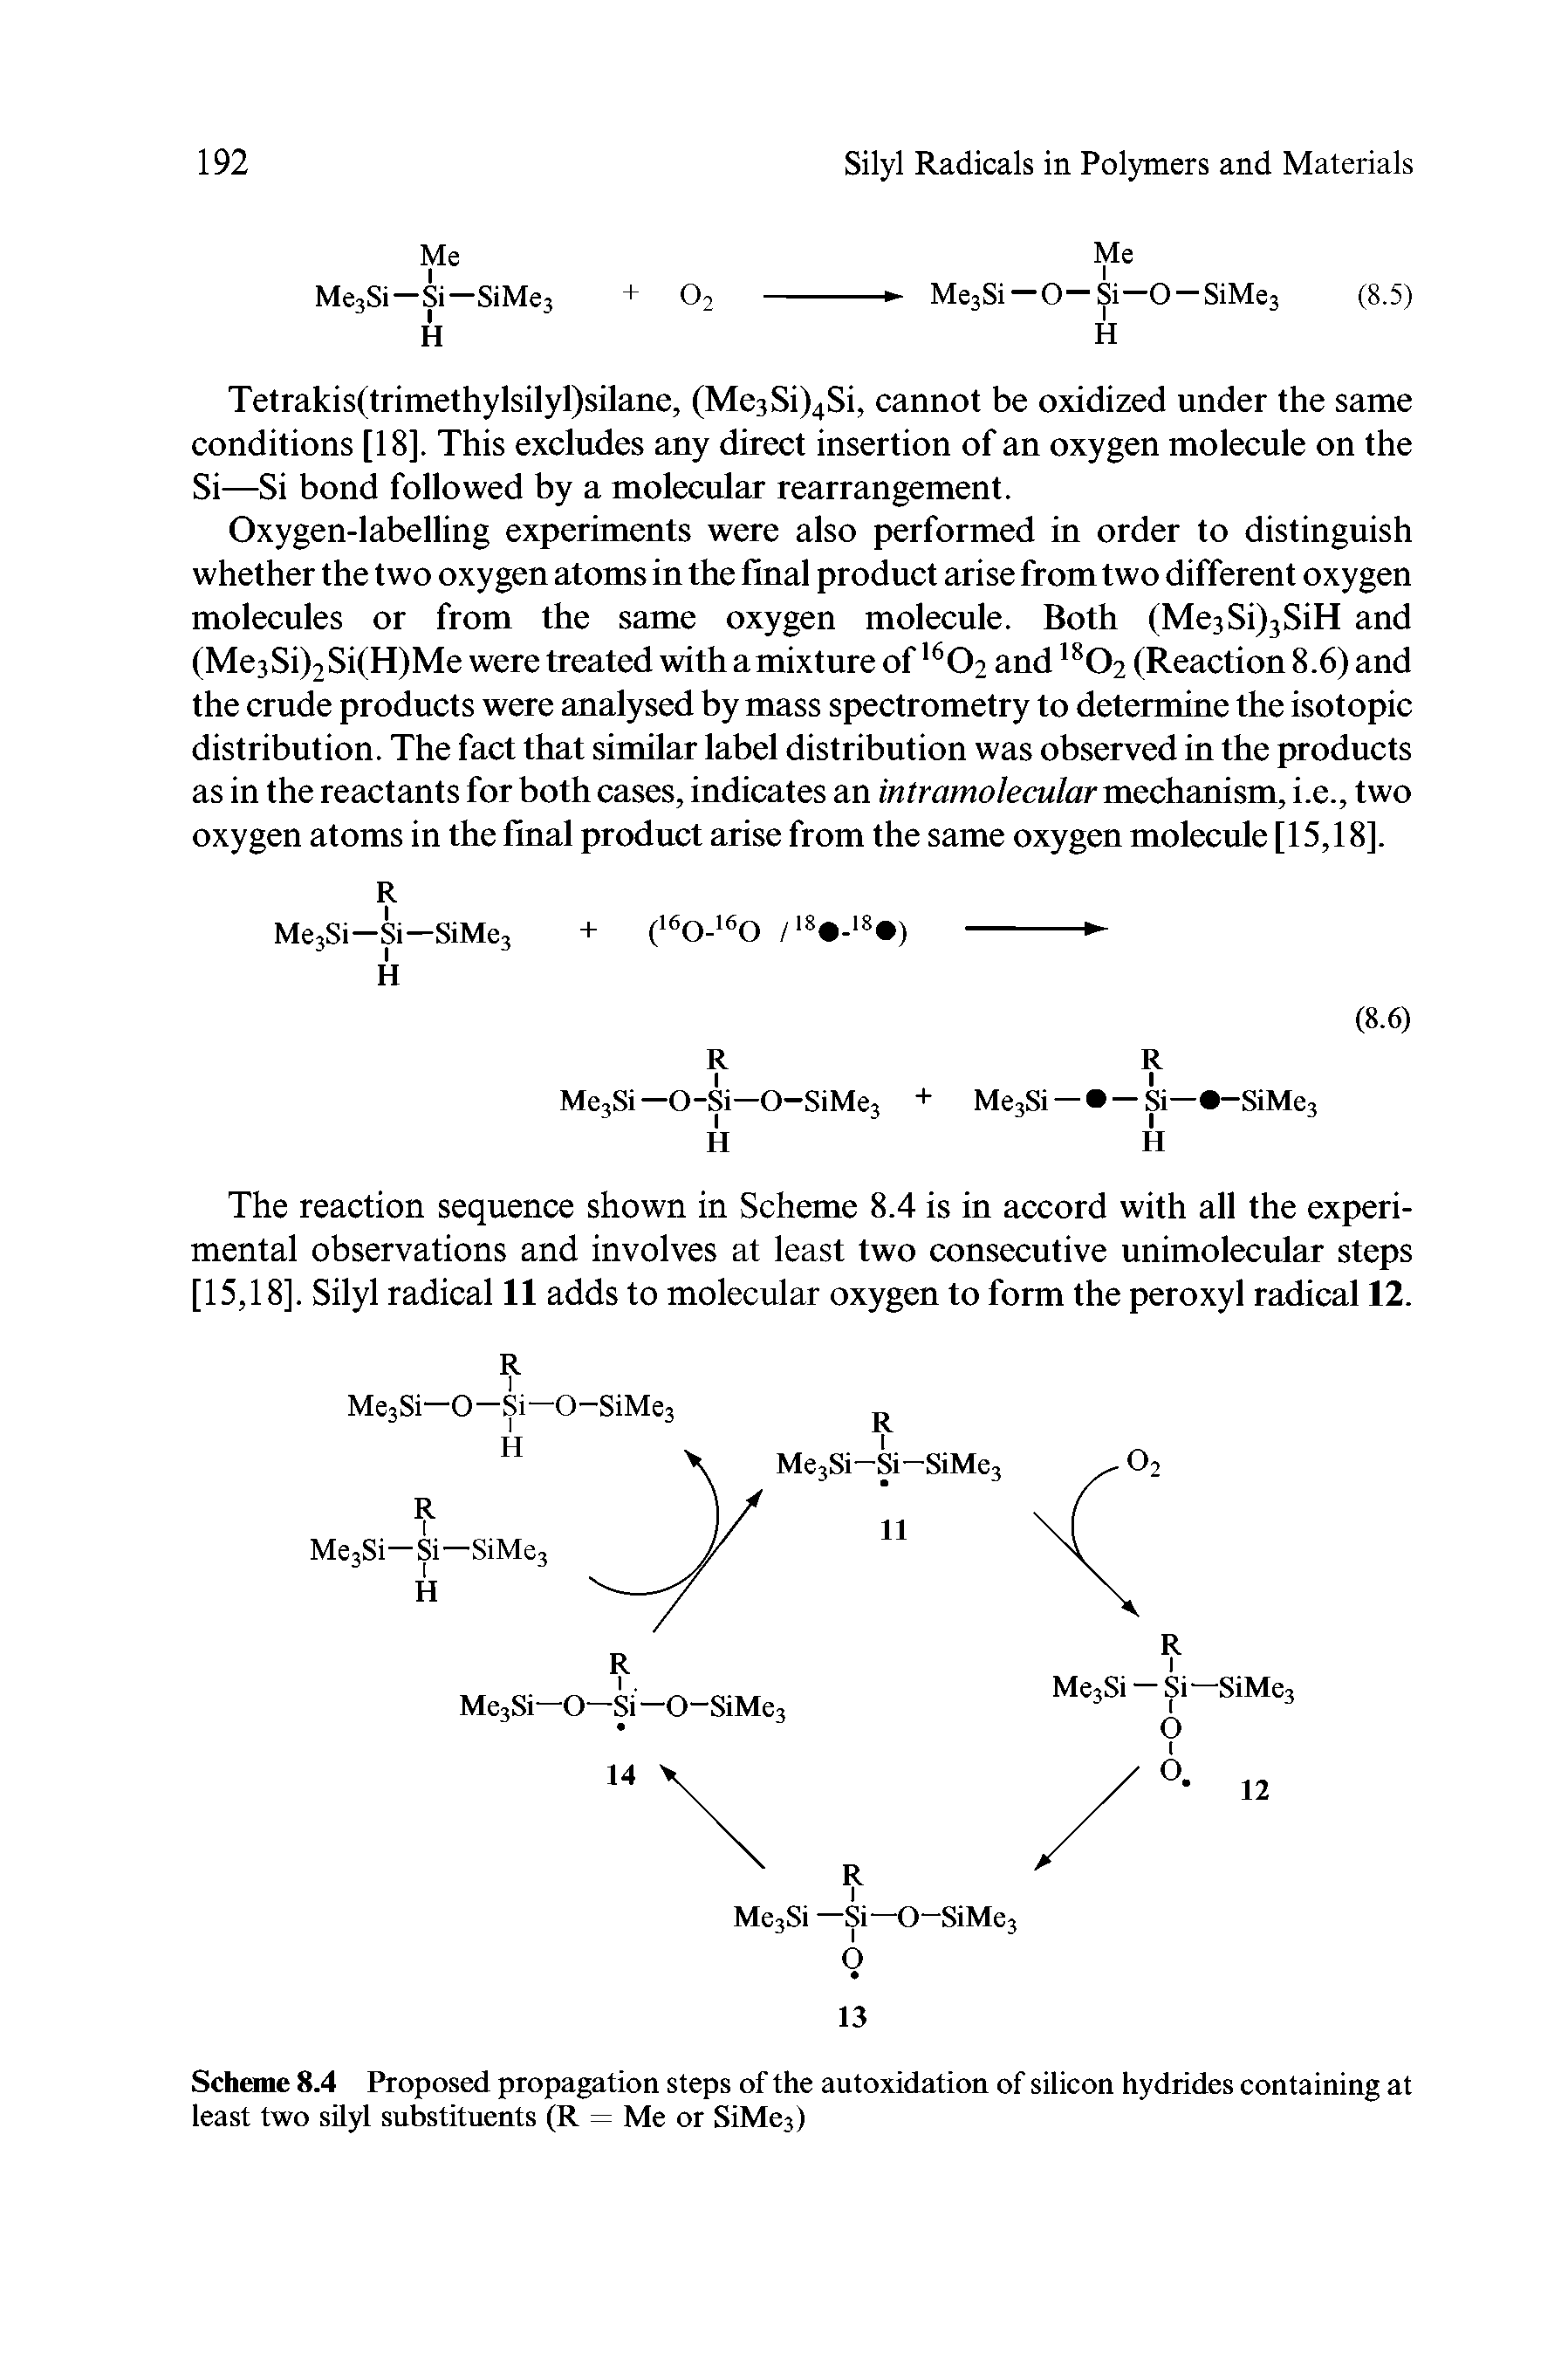 Scheme 8.4 Proposed propagation steps of the autoxidation of silicon hydrides containing at least two silyl substituents (R = Me or SiMe3)...